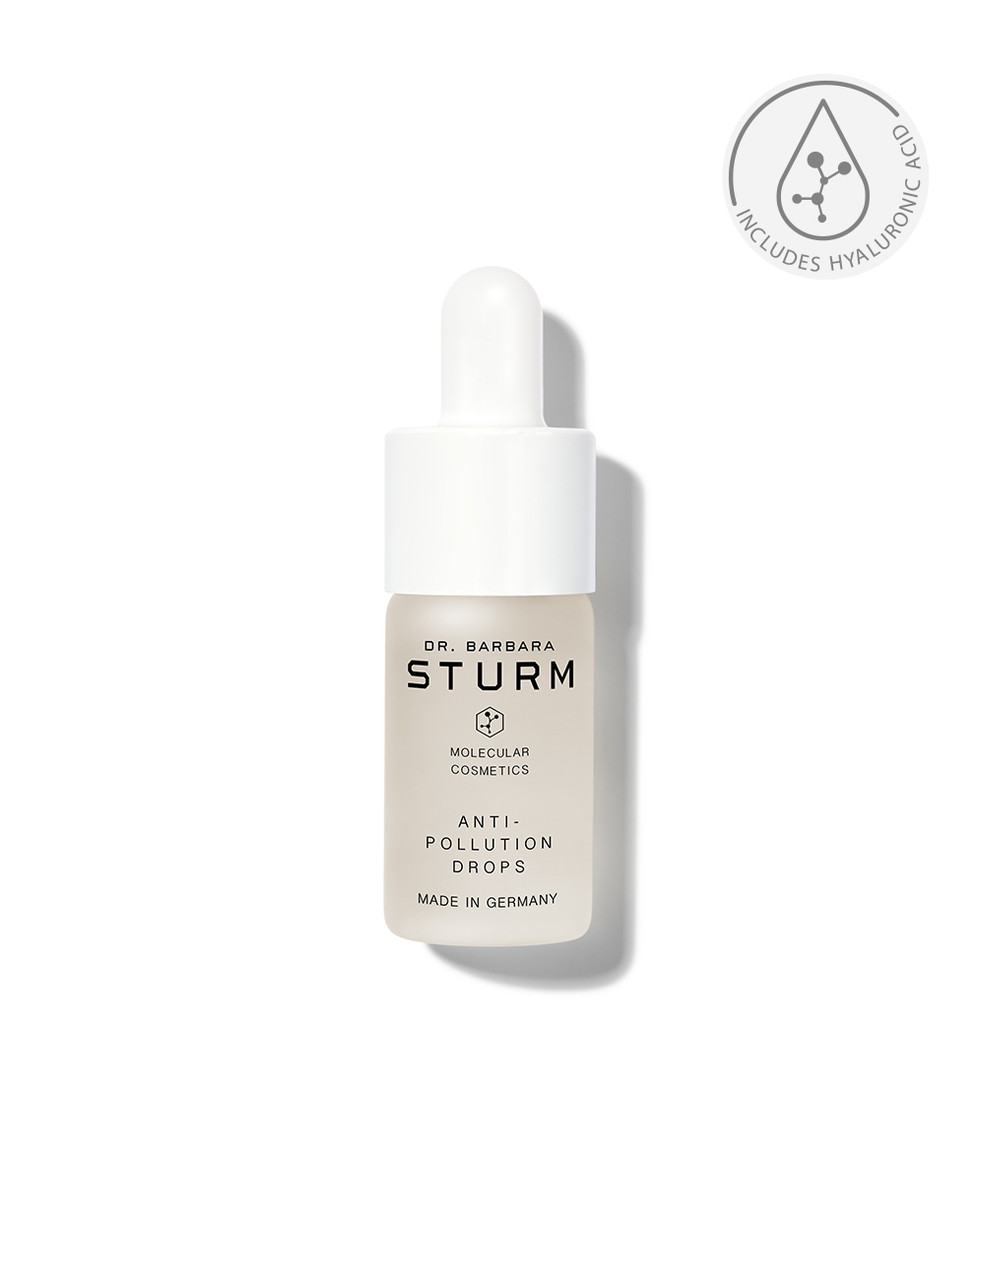 Dr. Barbara Sturm Anti-Pollution Drops - Hyaluronic Acid Serum Drops with Skin Barrier Function Support for Environmental Stressors + Blue Light Protection (30ml)